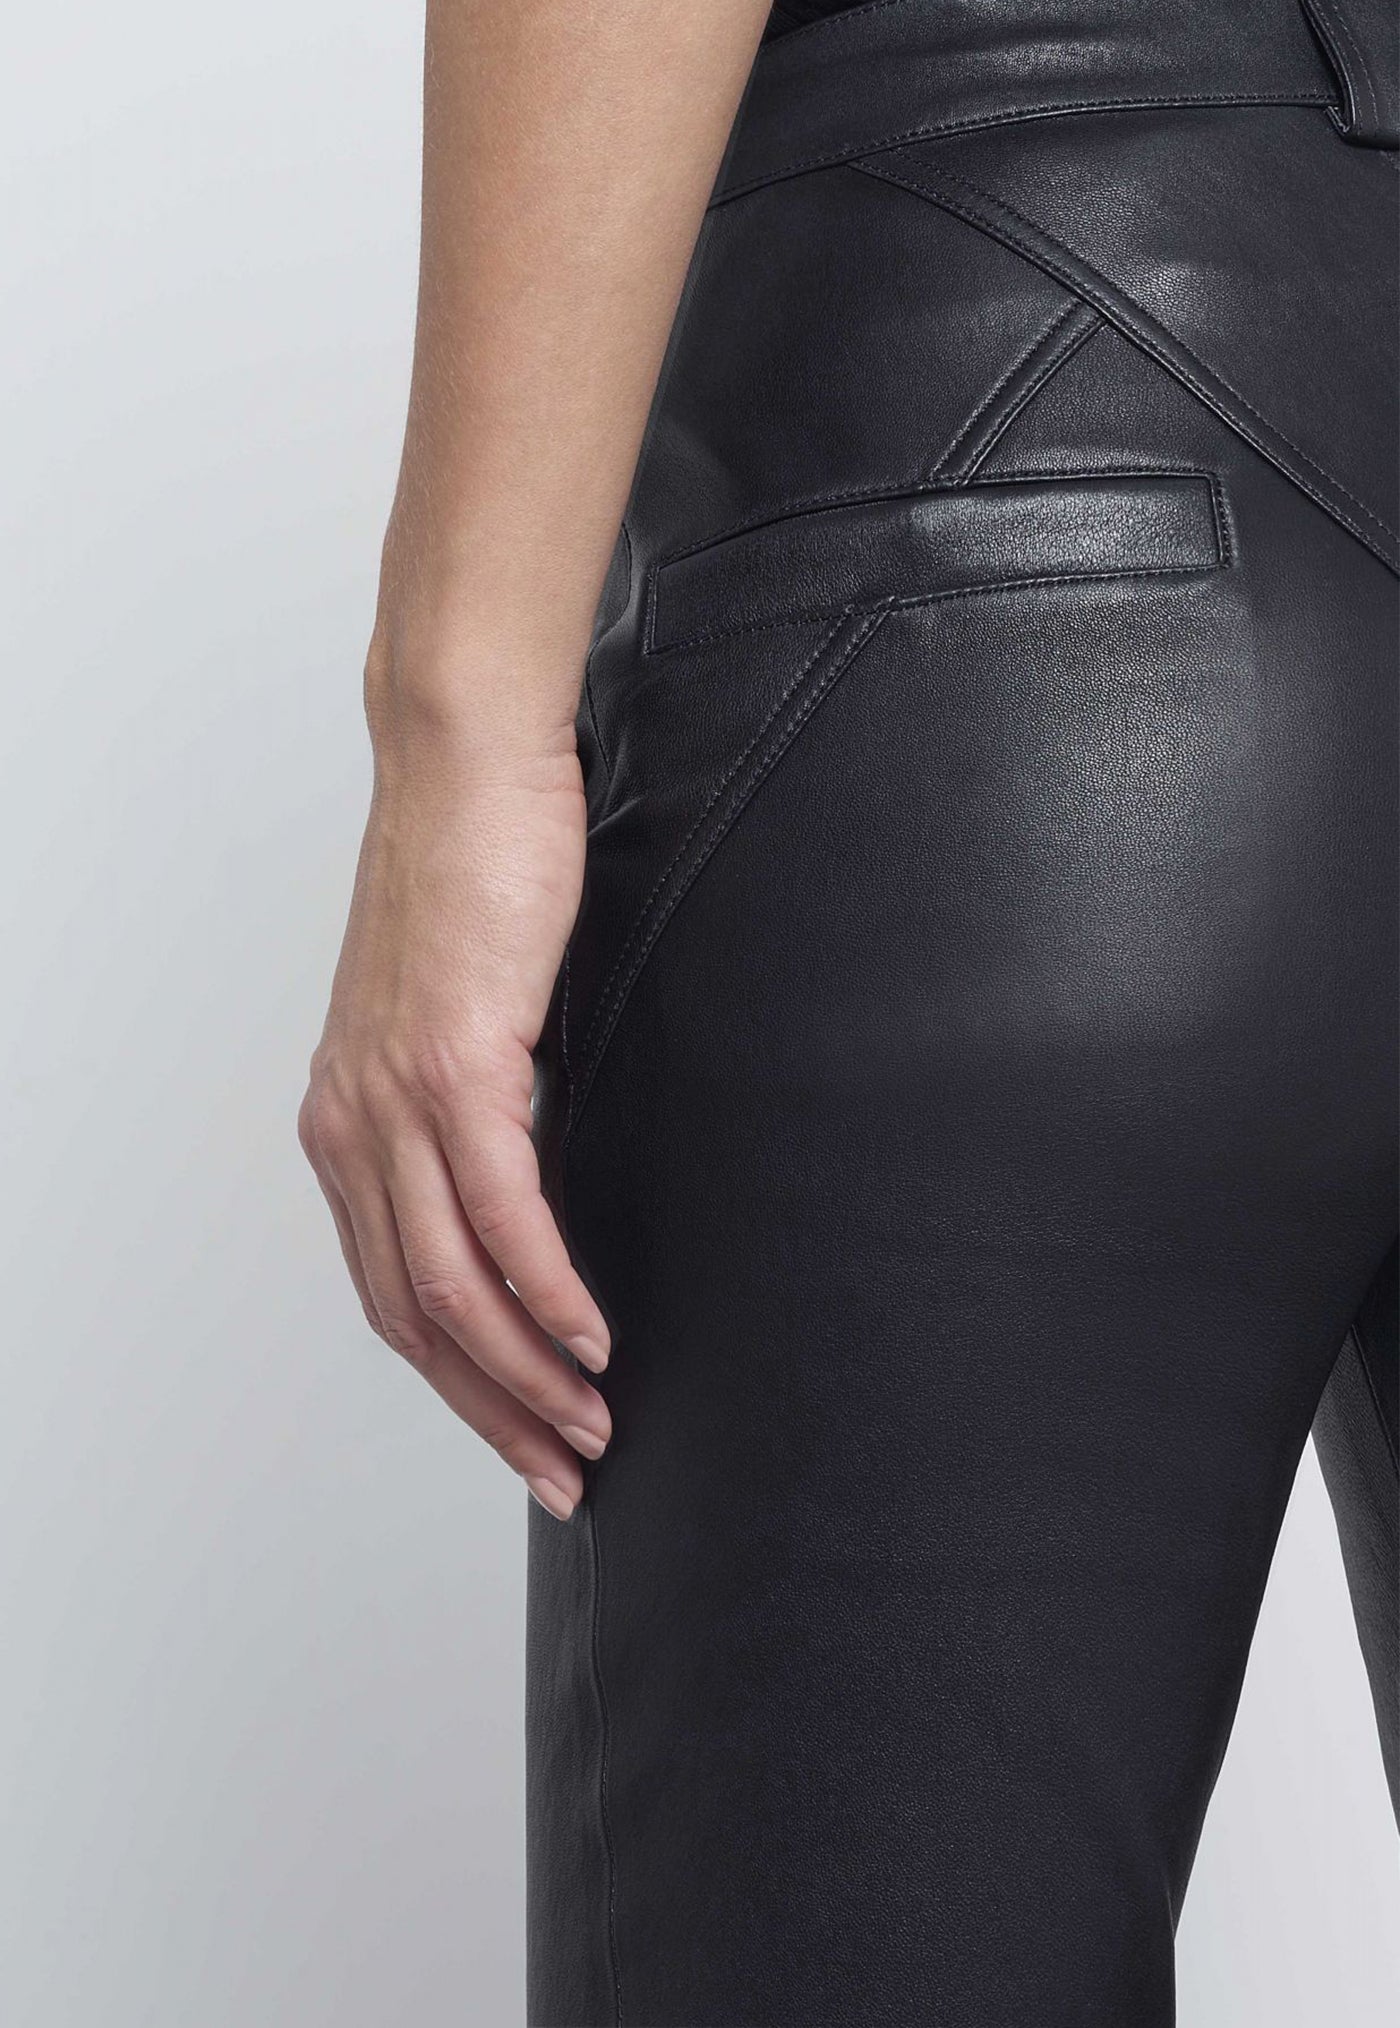 Leather Pants - Black sold by Angel Divine